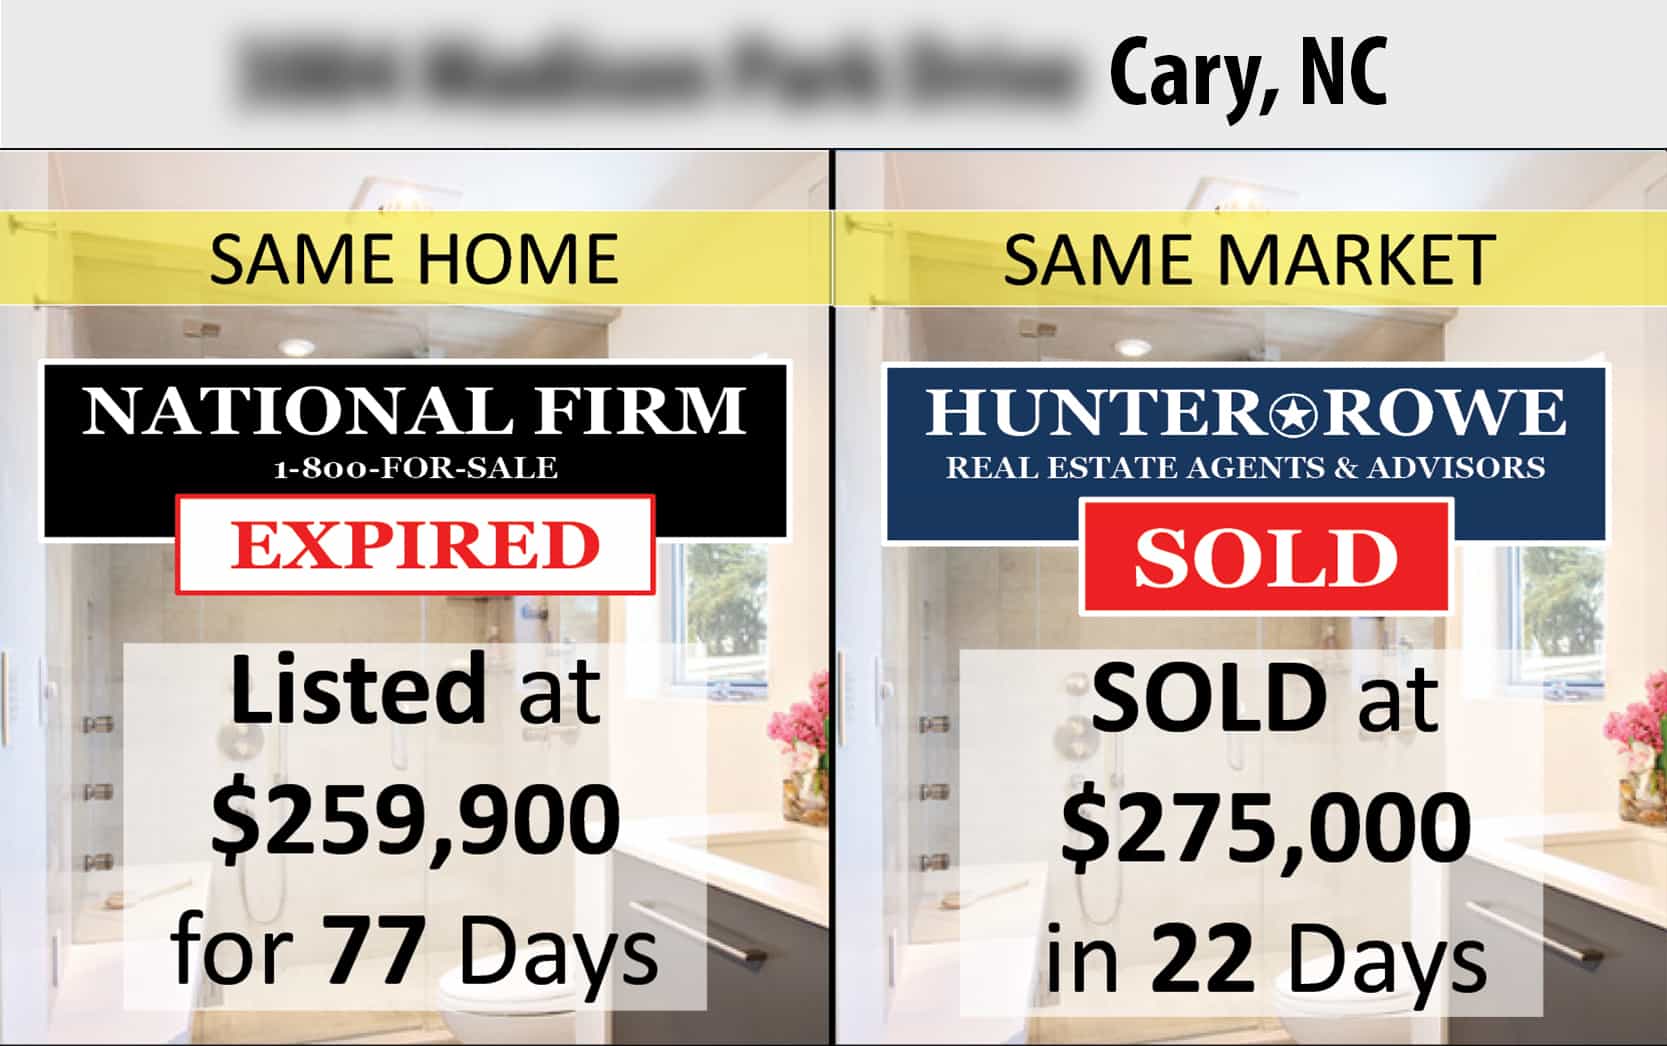 3004-madison-park-drive-carync-home-sold-in-22-days